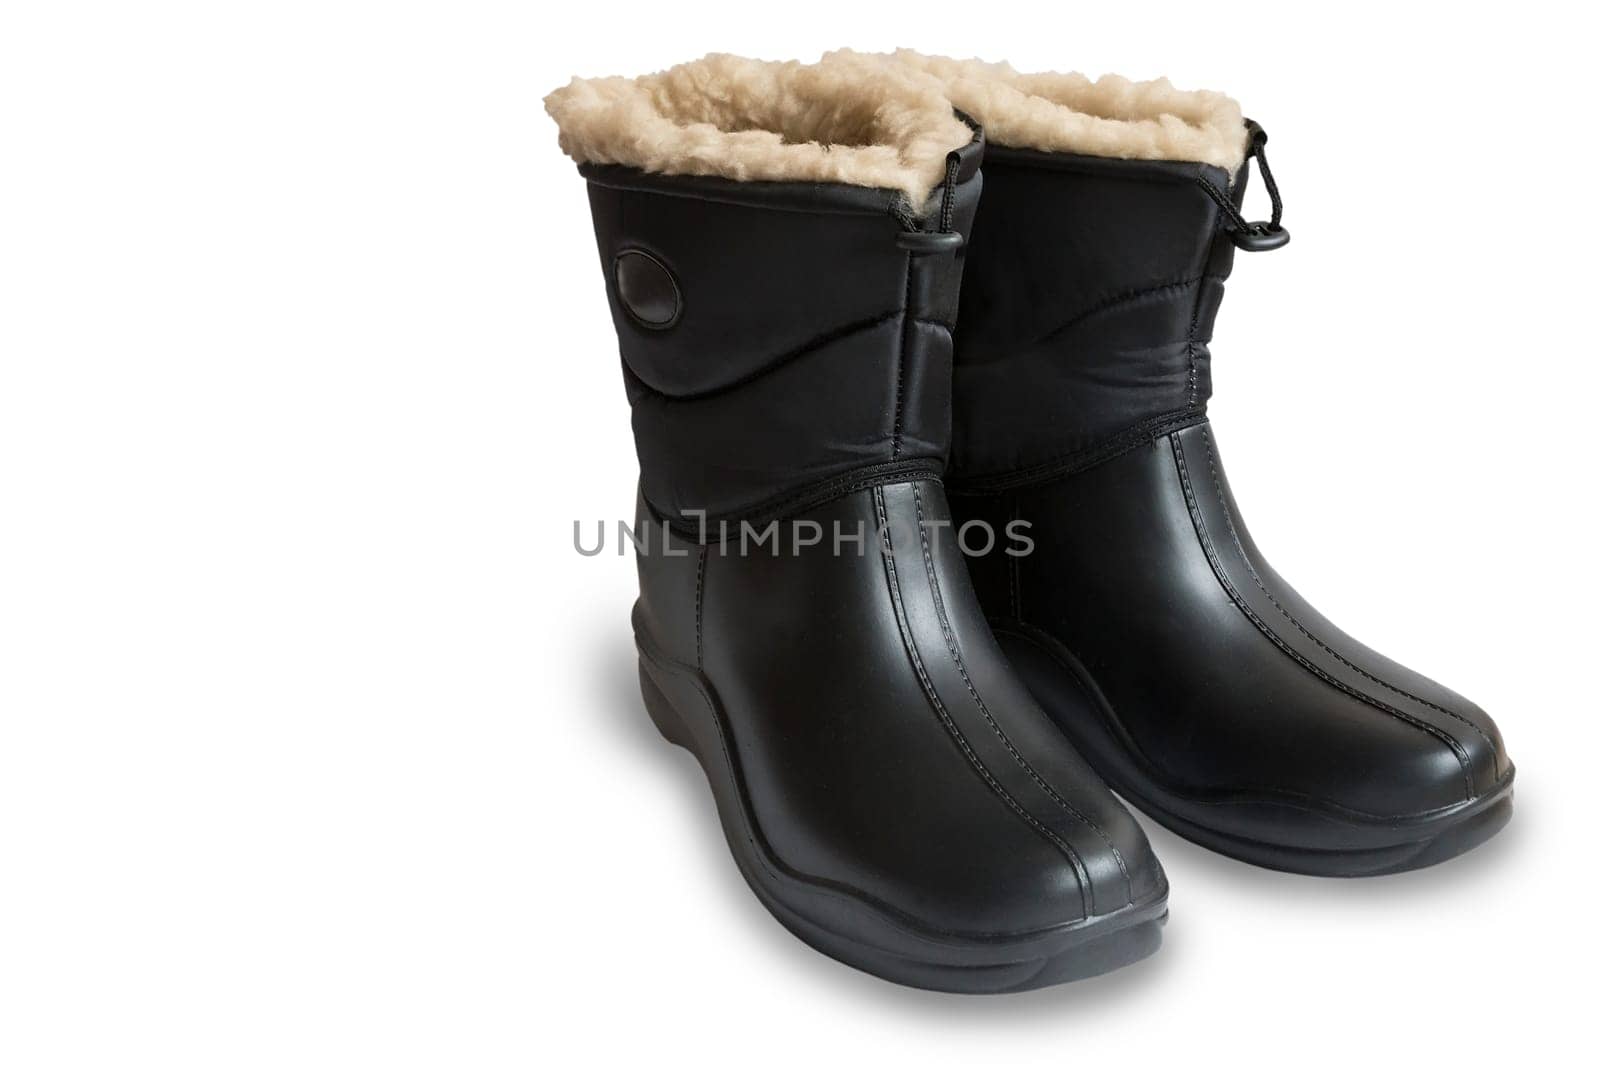 Waterproof men's boots for work on a white background. by georgina198